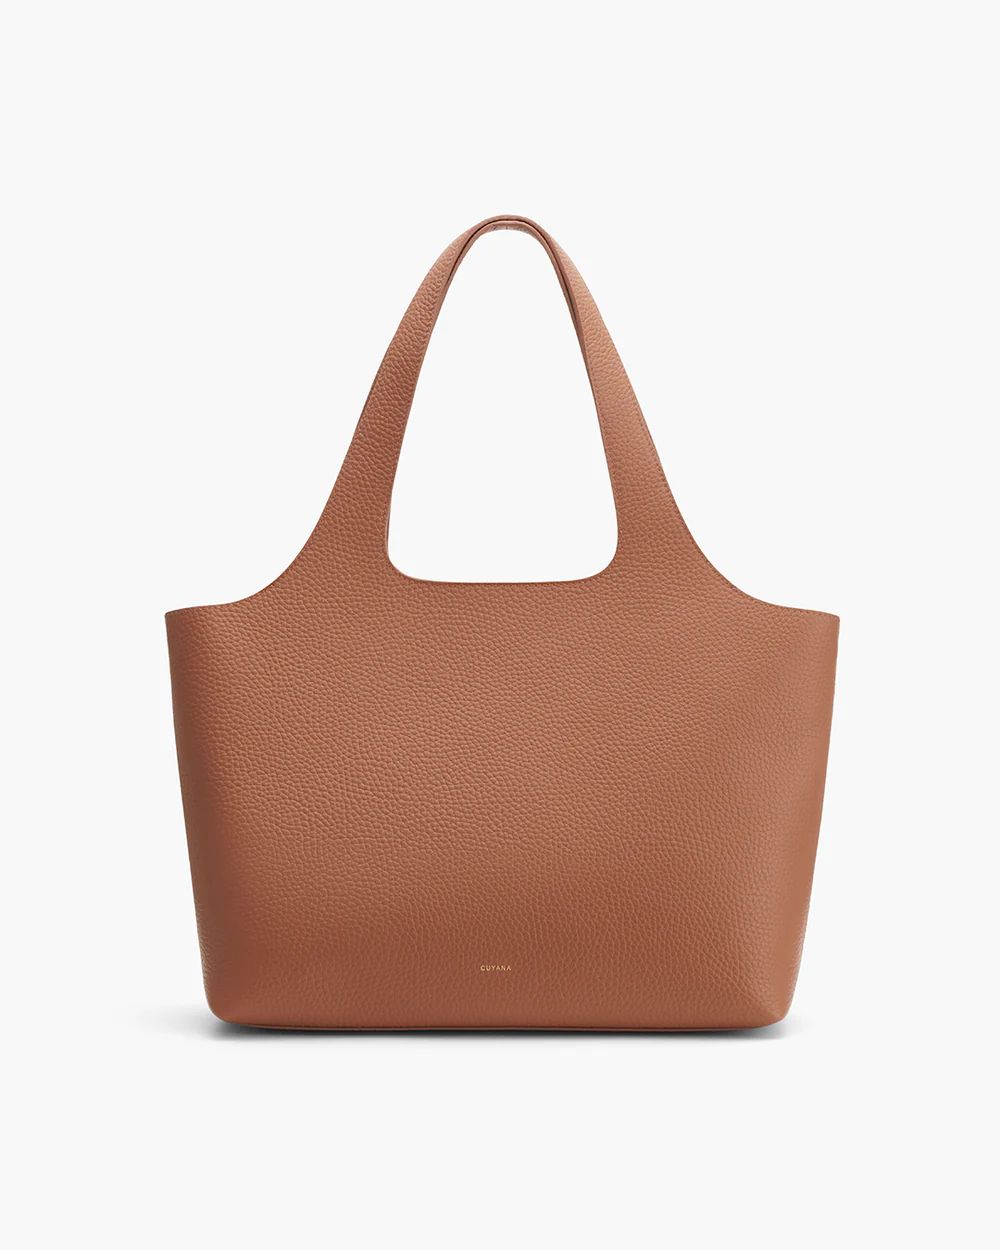 System Tote 13-inch | Cuyana